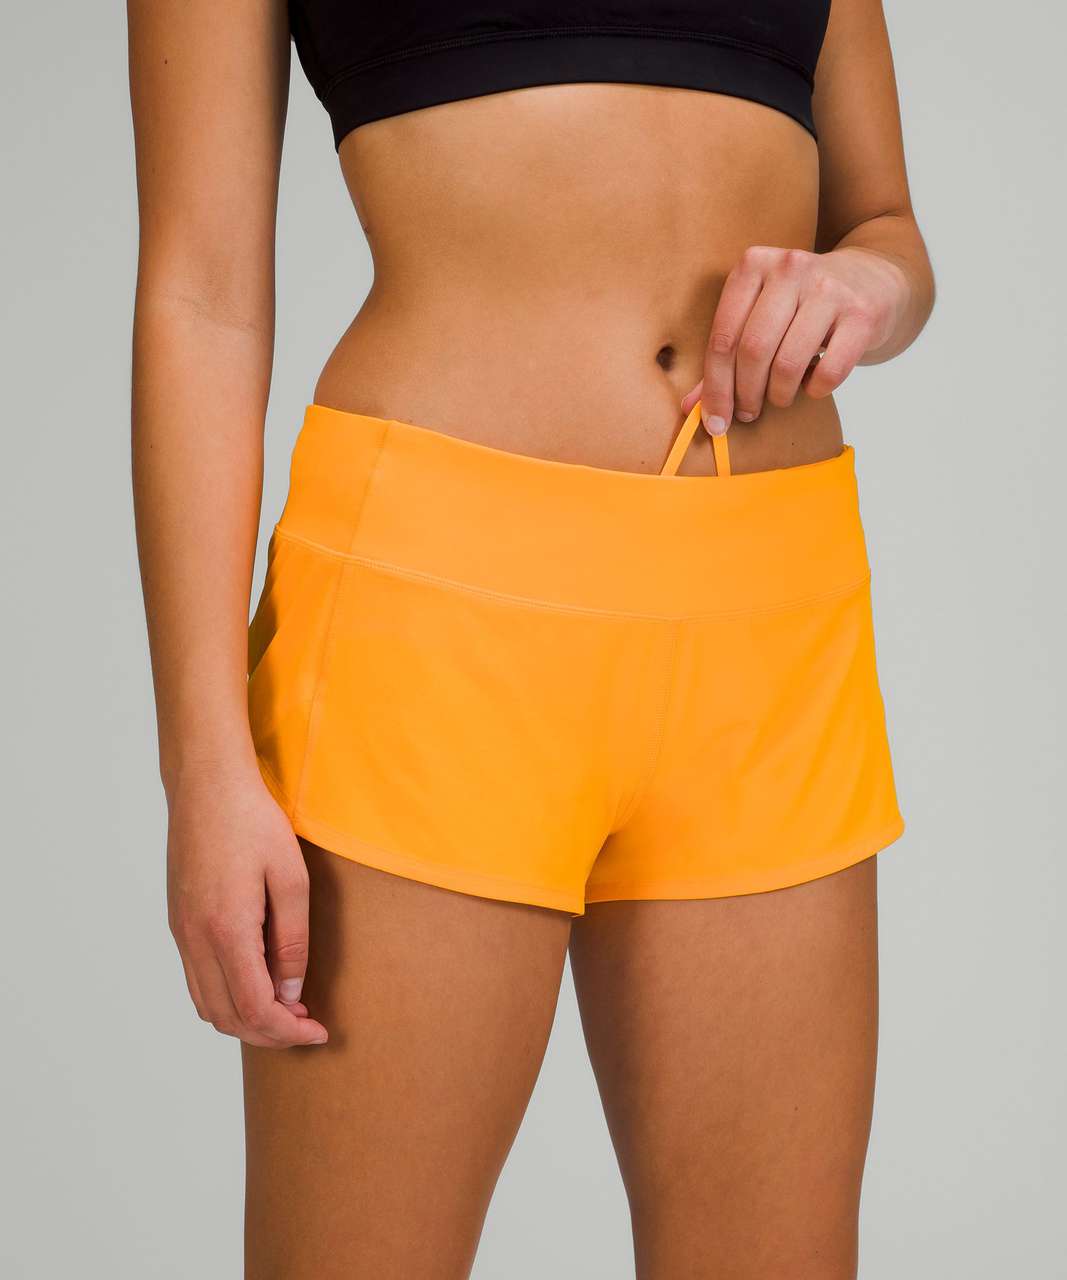 Lululemon Speed Up Low-Rise Short 2.5" - Clementine